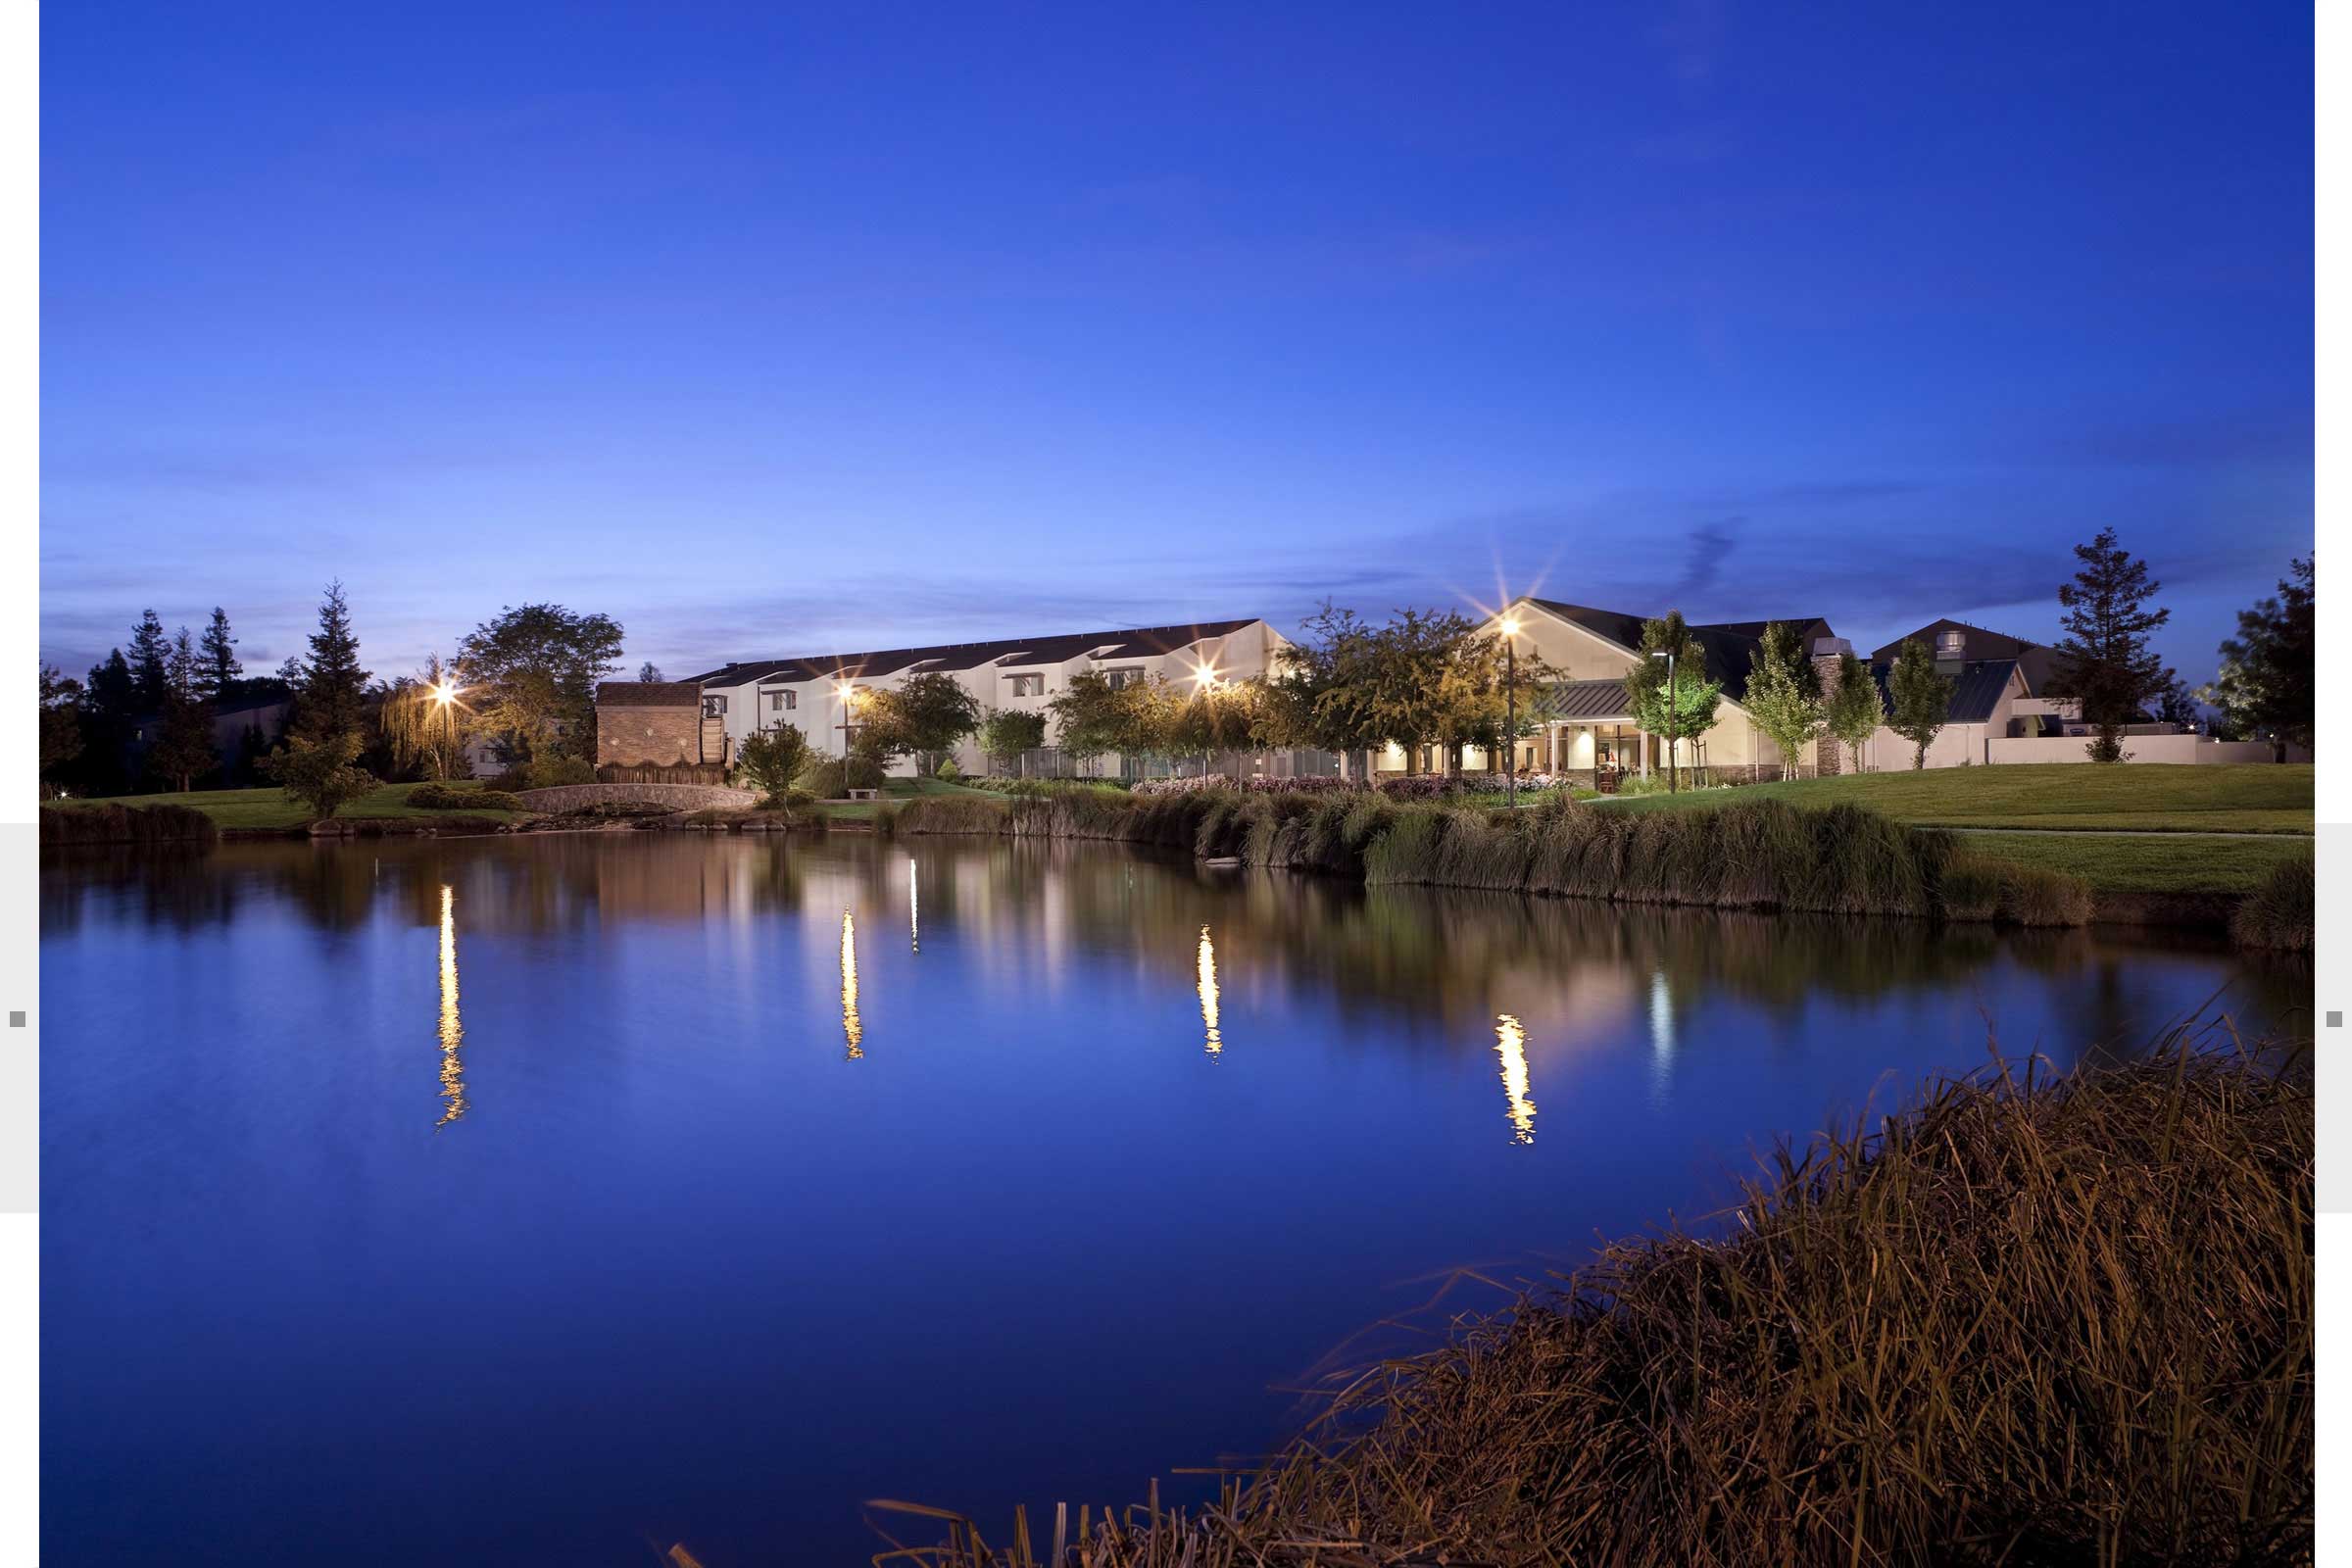 CSU evening exterior with pond in foreground